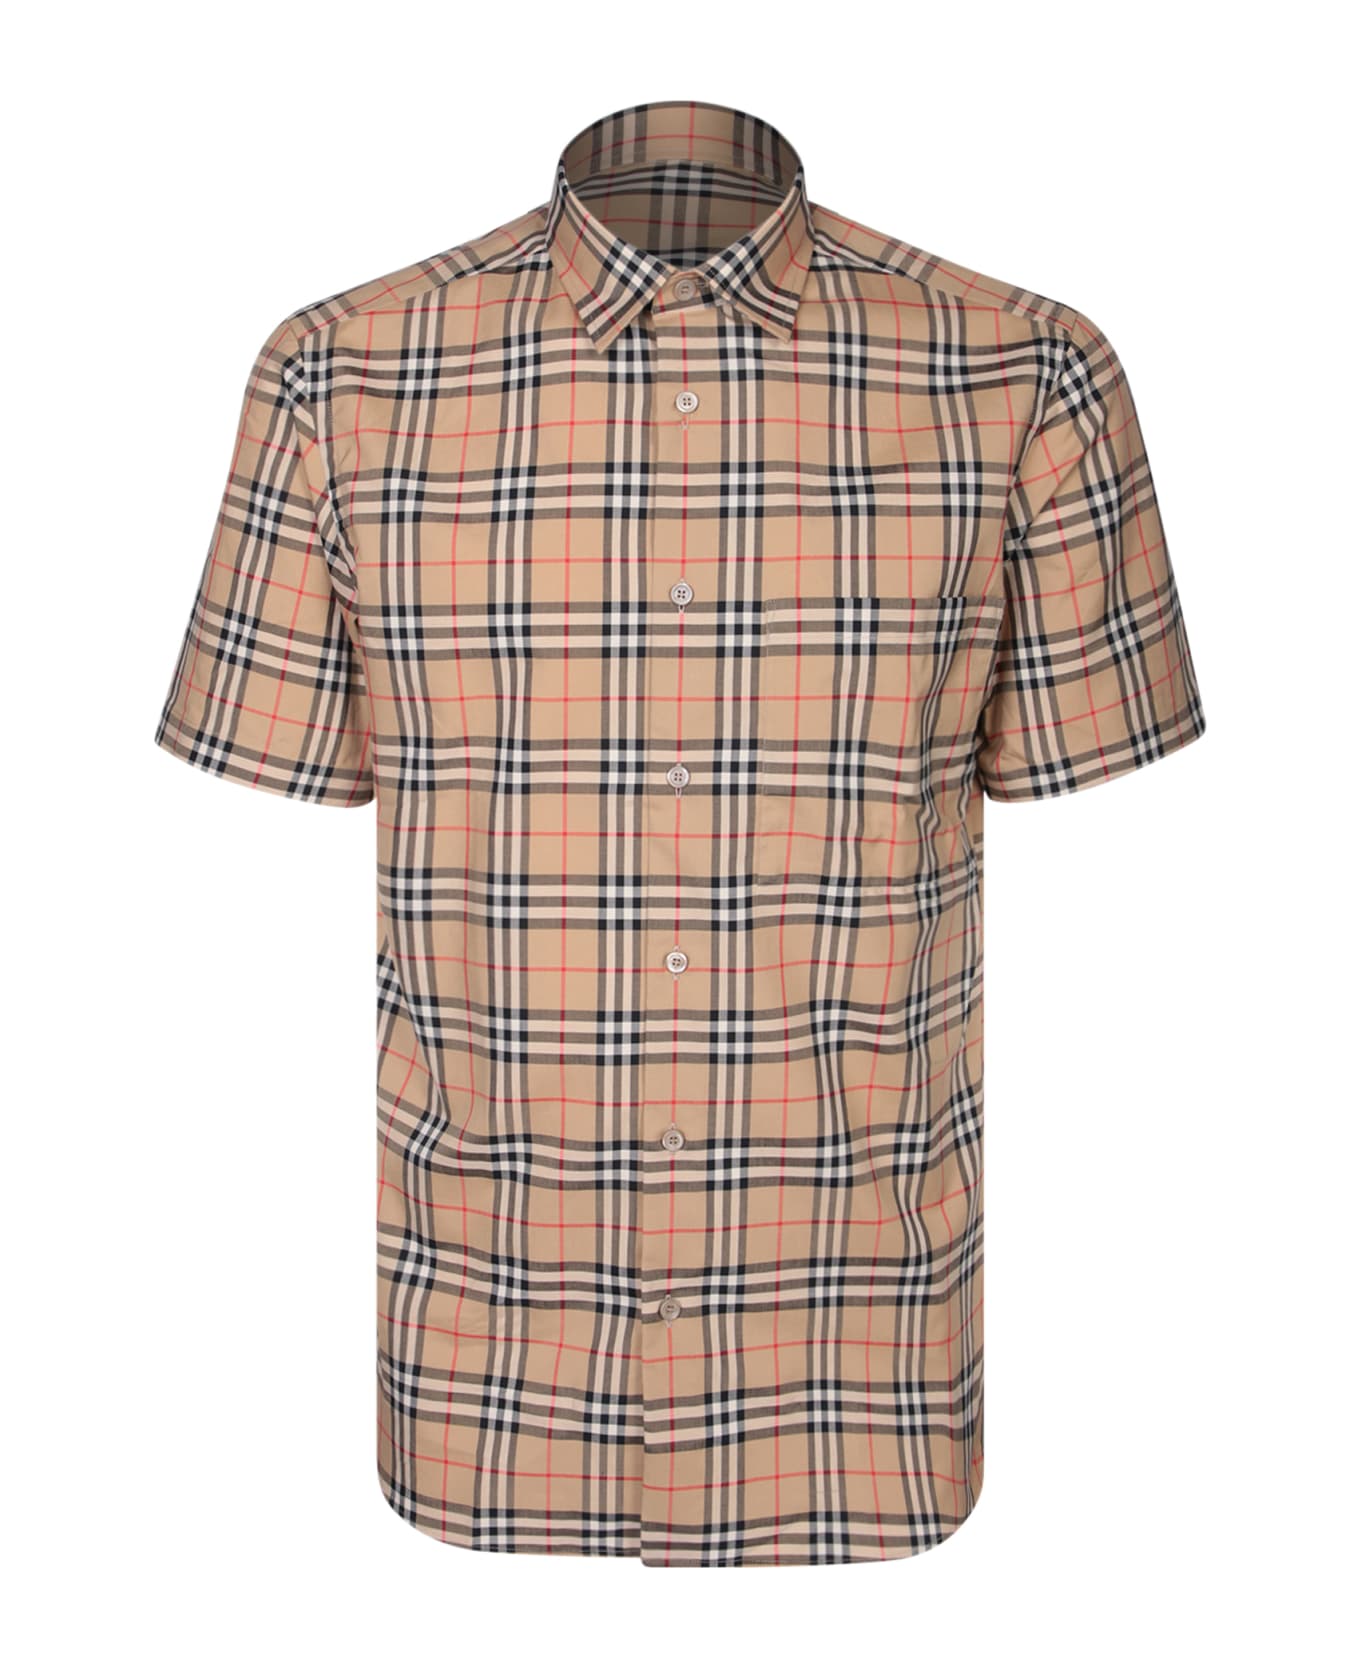 Burberry Vintage Check Shirt In Cotton - Beige シャツ